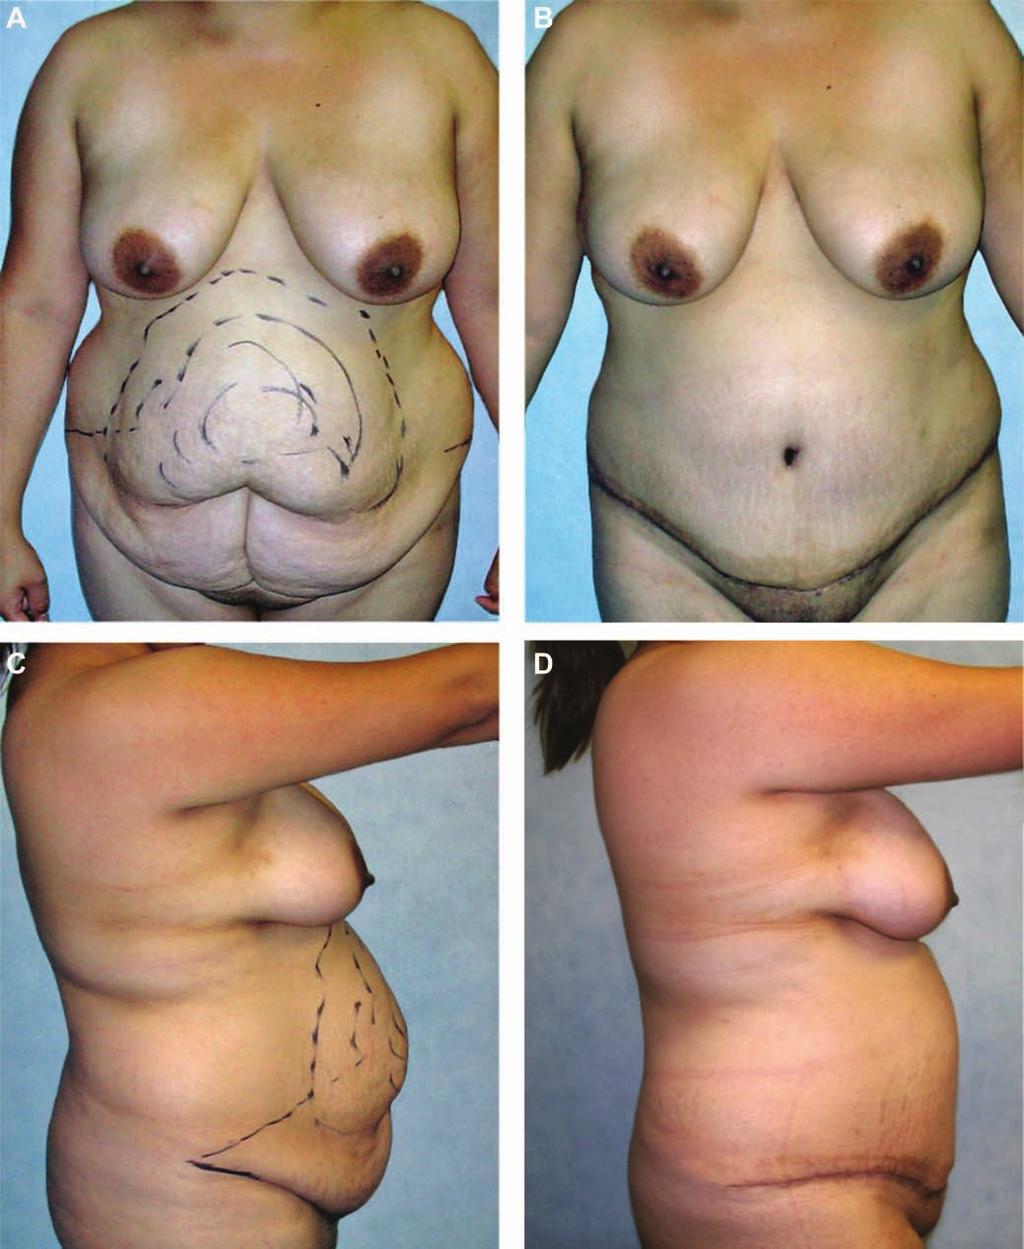 Antonetti and Antonetti 421 Figure 5. (A, C) This 29-year-old woman presented for treatment of her abdominal region.